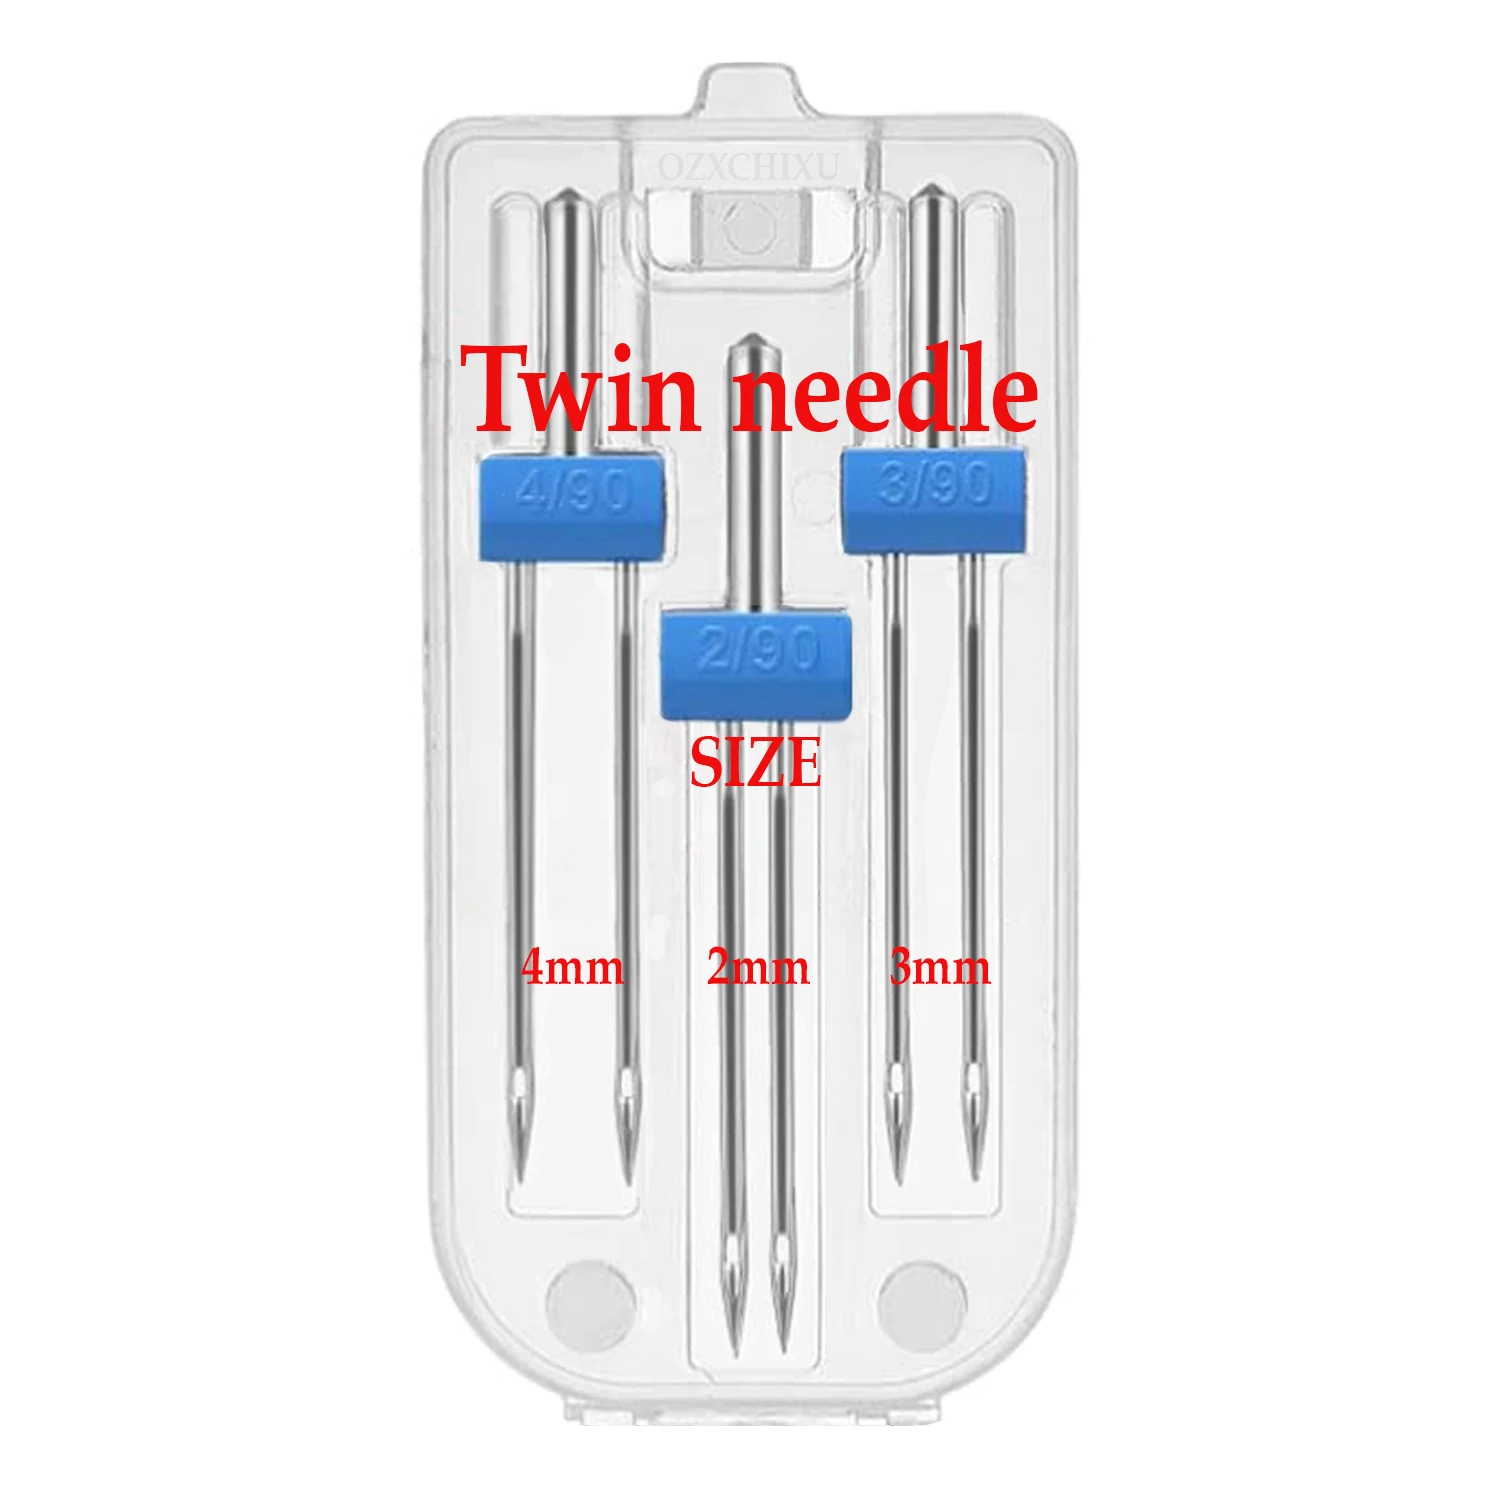 Size 2/3/4mm Twin Needles and Wrinkled 9 Grooves Sewing Presser Foot Feet  for Brother Singer Sewing Machine Accessories 2/3/4/90 - AliExpress